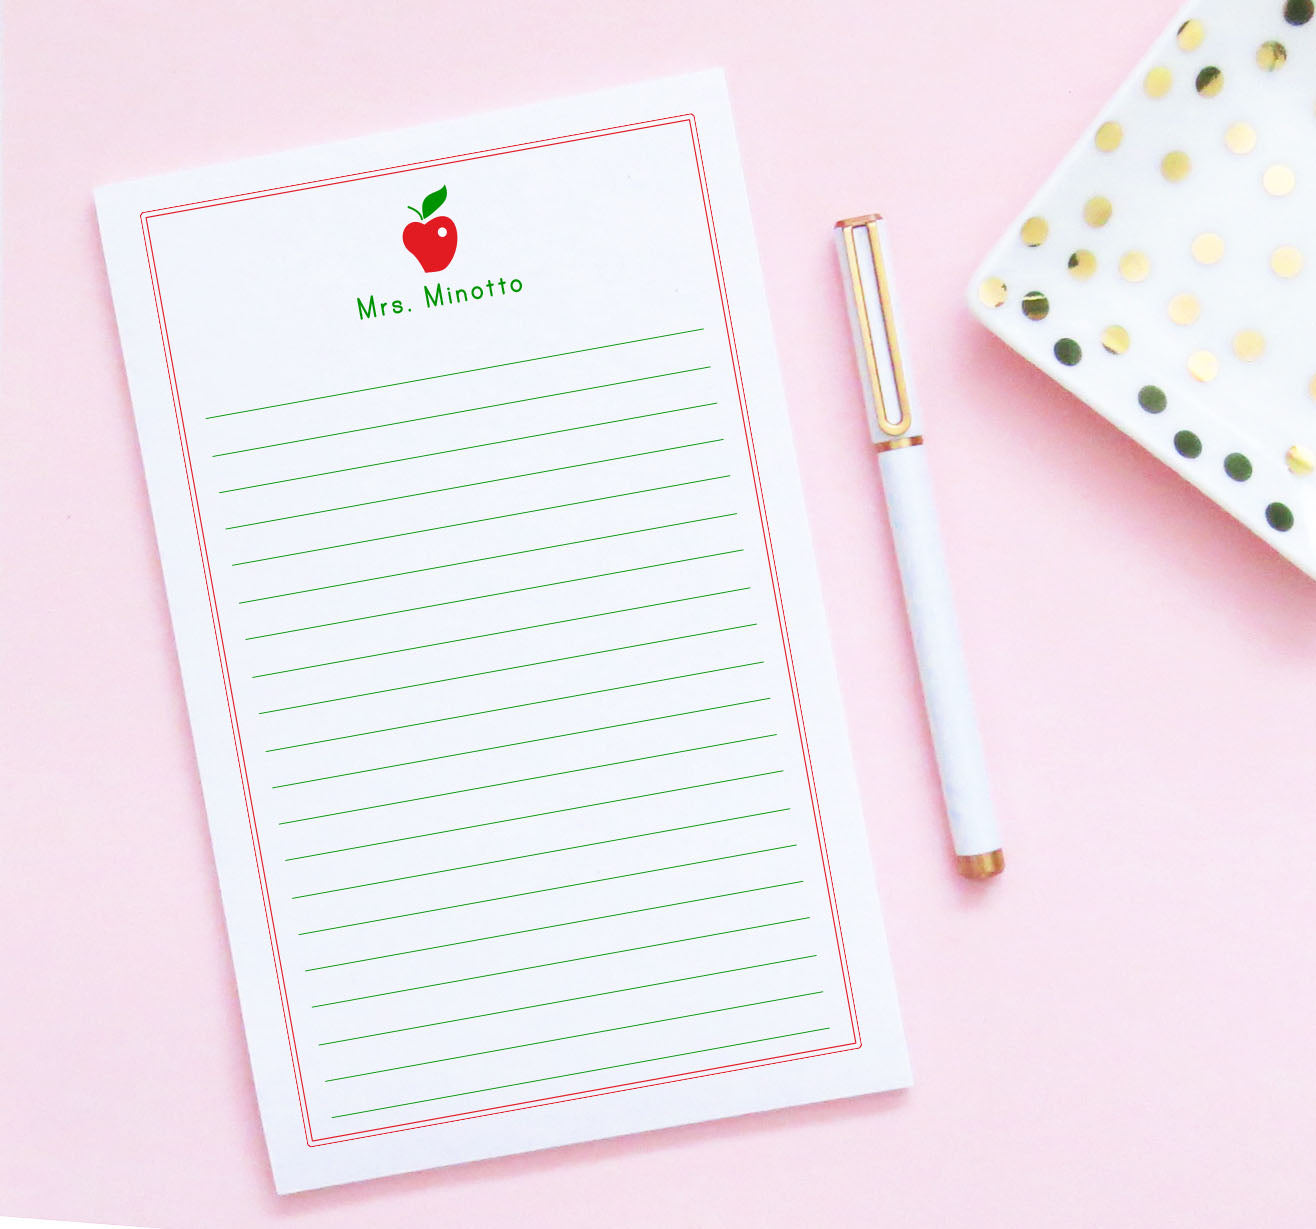 Personalized Teacher Notepad